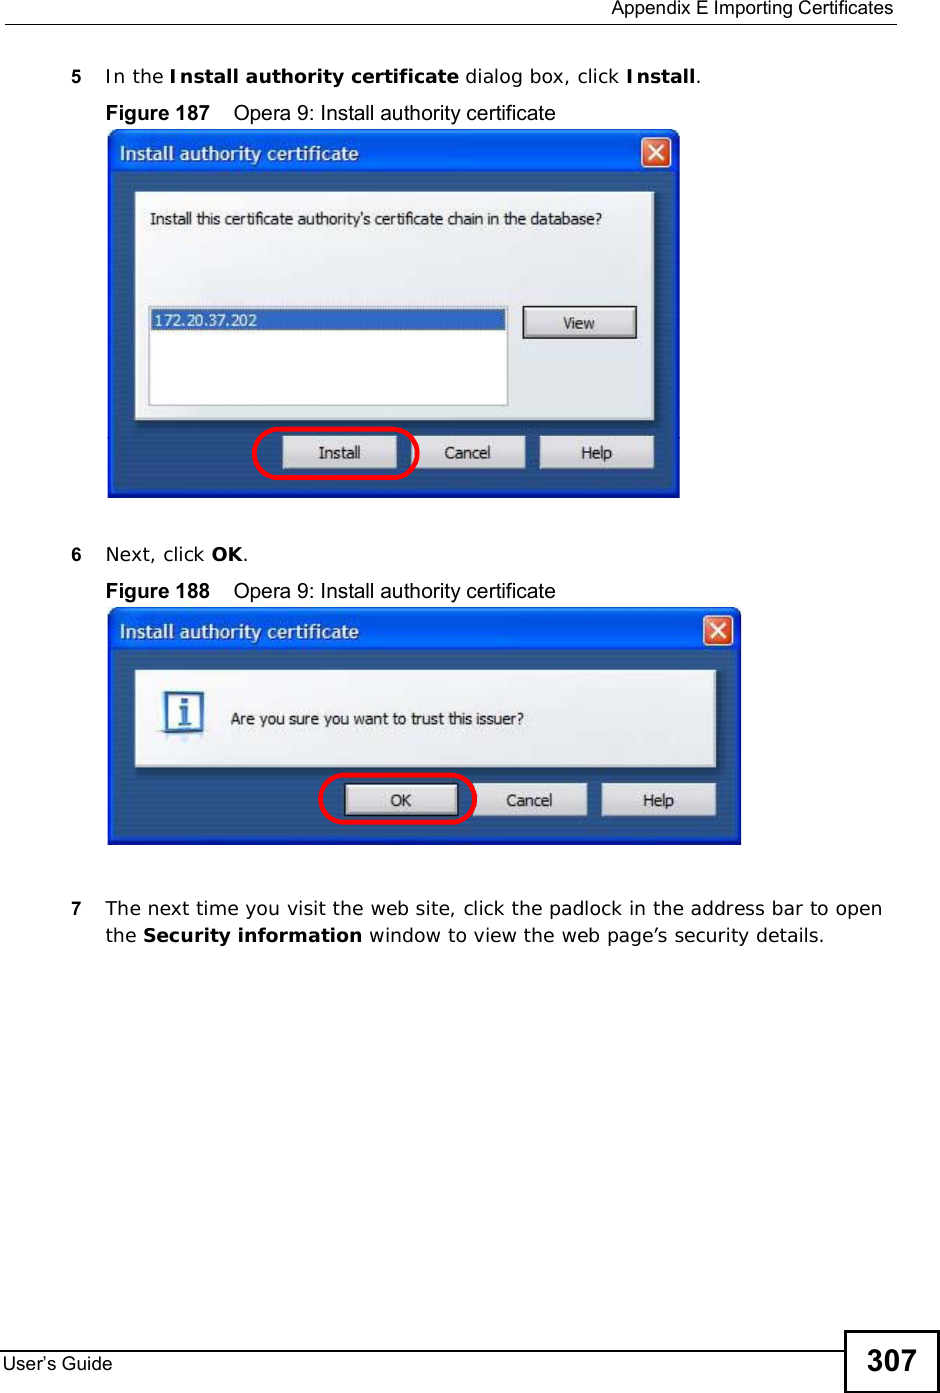  Appendix EImporting CertificatesUser s Guide 3075In the Install authority certificate dialog box, click Install.Figure 187    Opera 9: Install authority certificate6Next, click OK.Figure 188    Opera 9: Install authority certificate7The next time you visit the web site, click the padlock in the address bar to open the Security information window to view the web page’s security details.